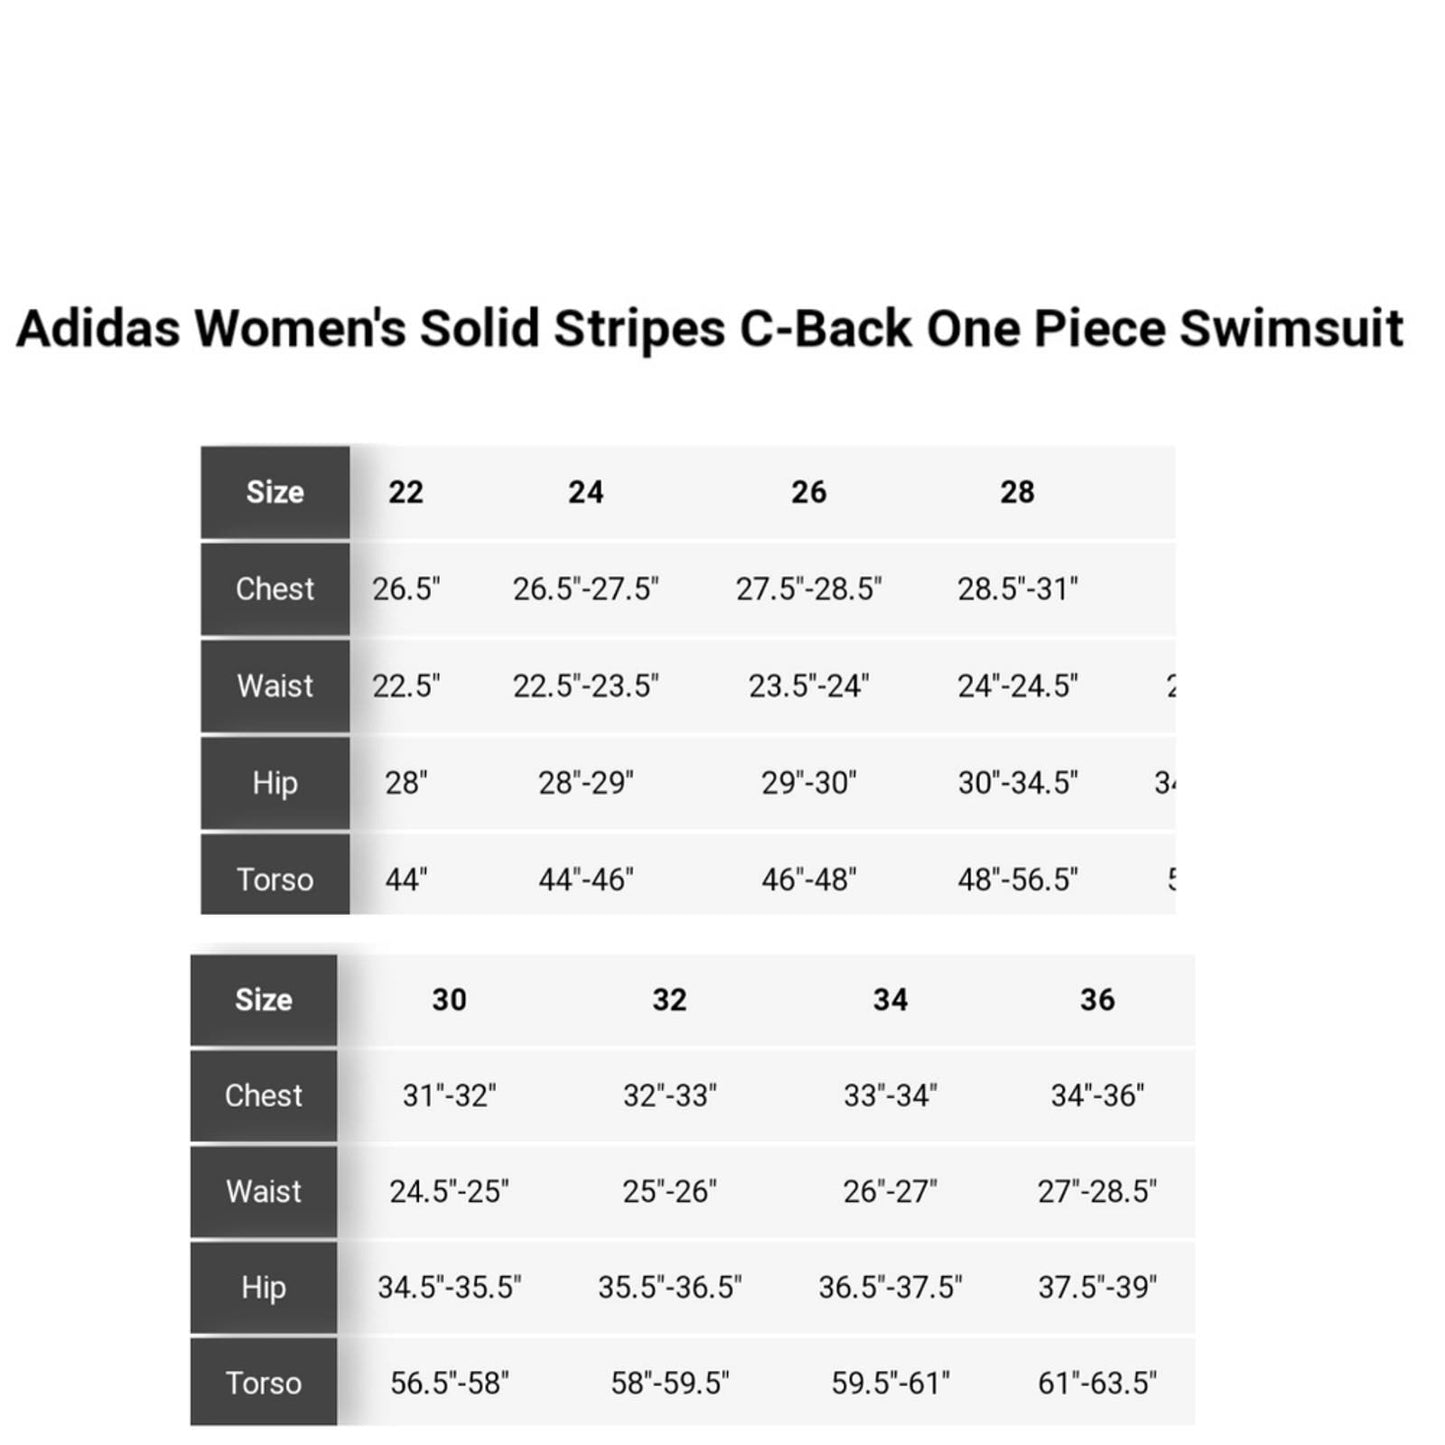 Adidas Solid Stripes C- Back One Piece Swimsuit